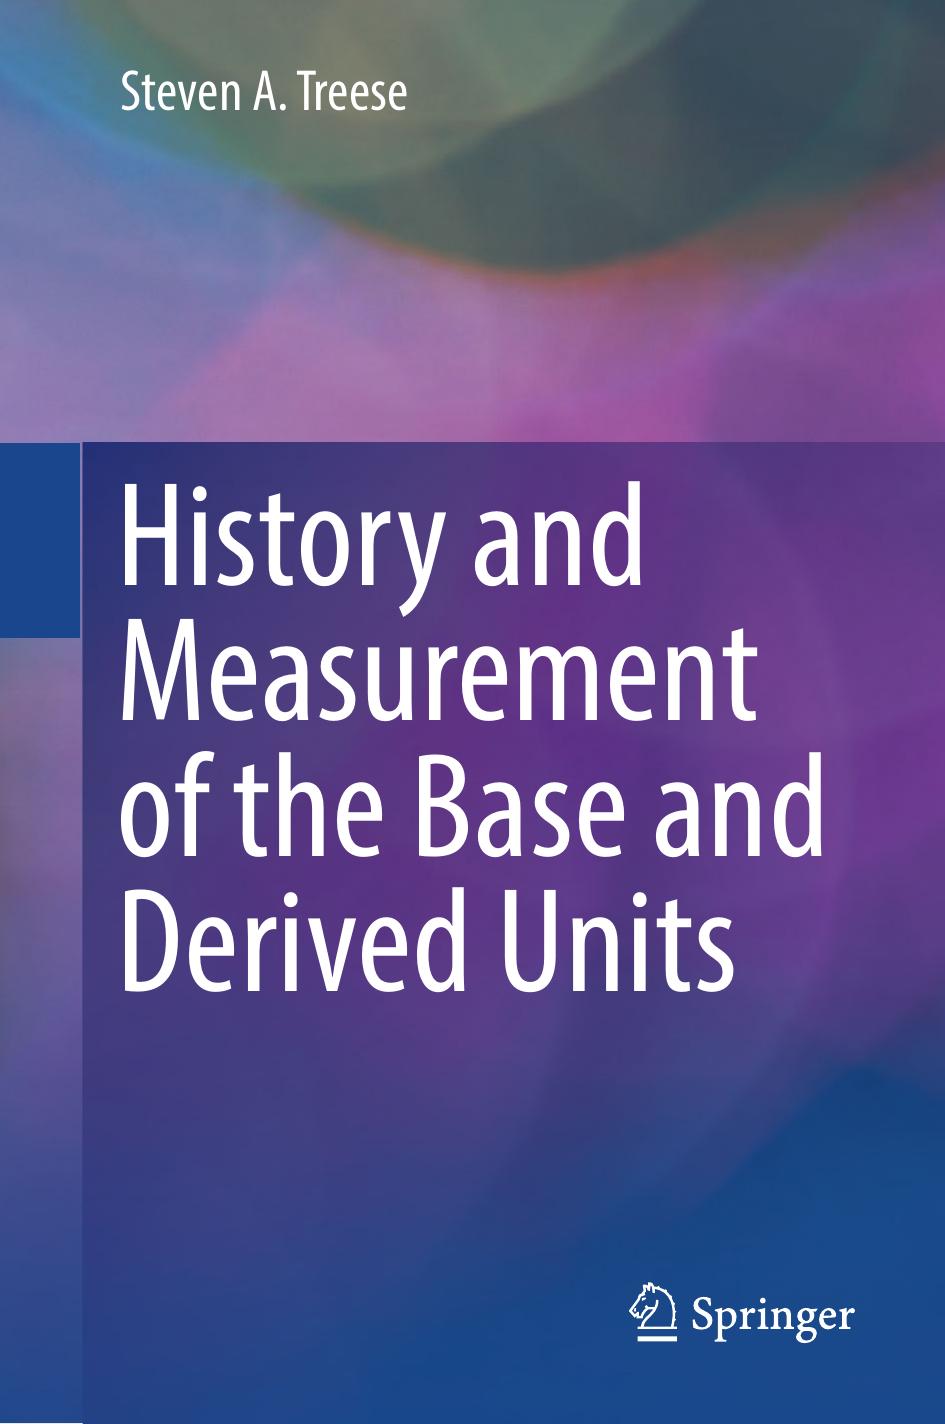 History and Measurement of the Base and Derived Units by Steven A. Treese